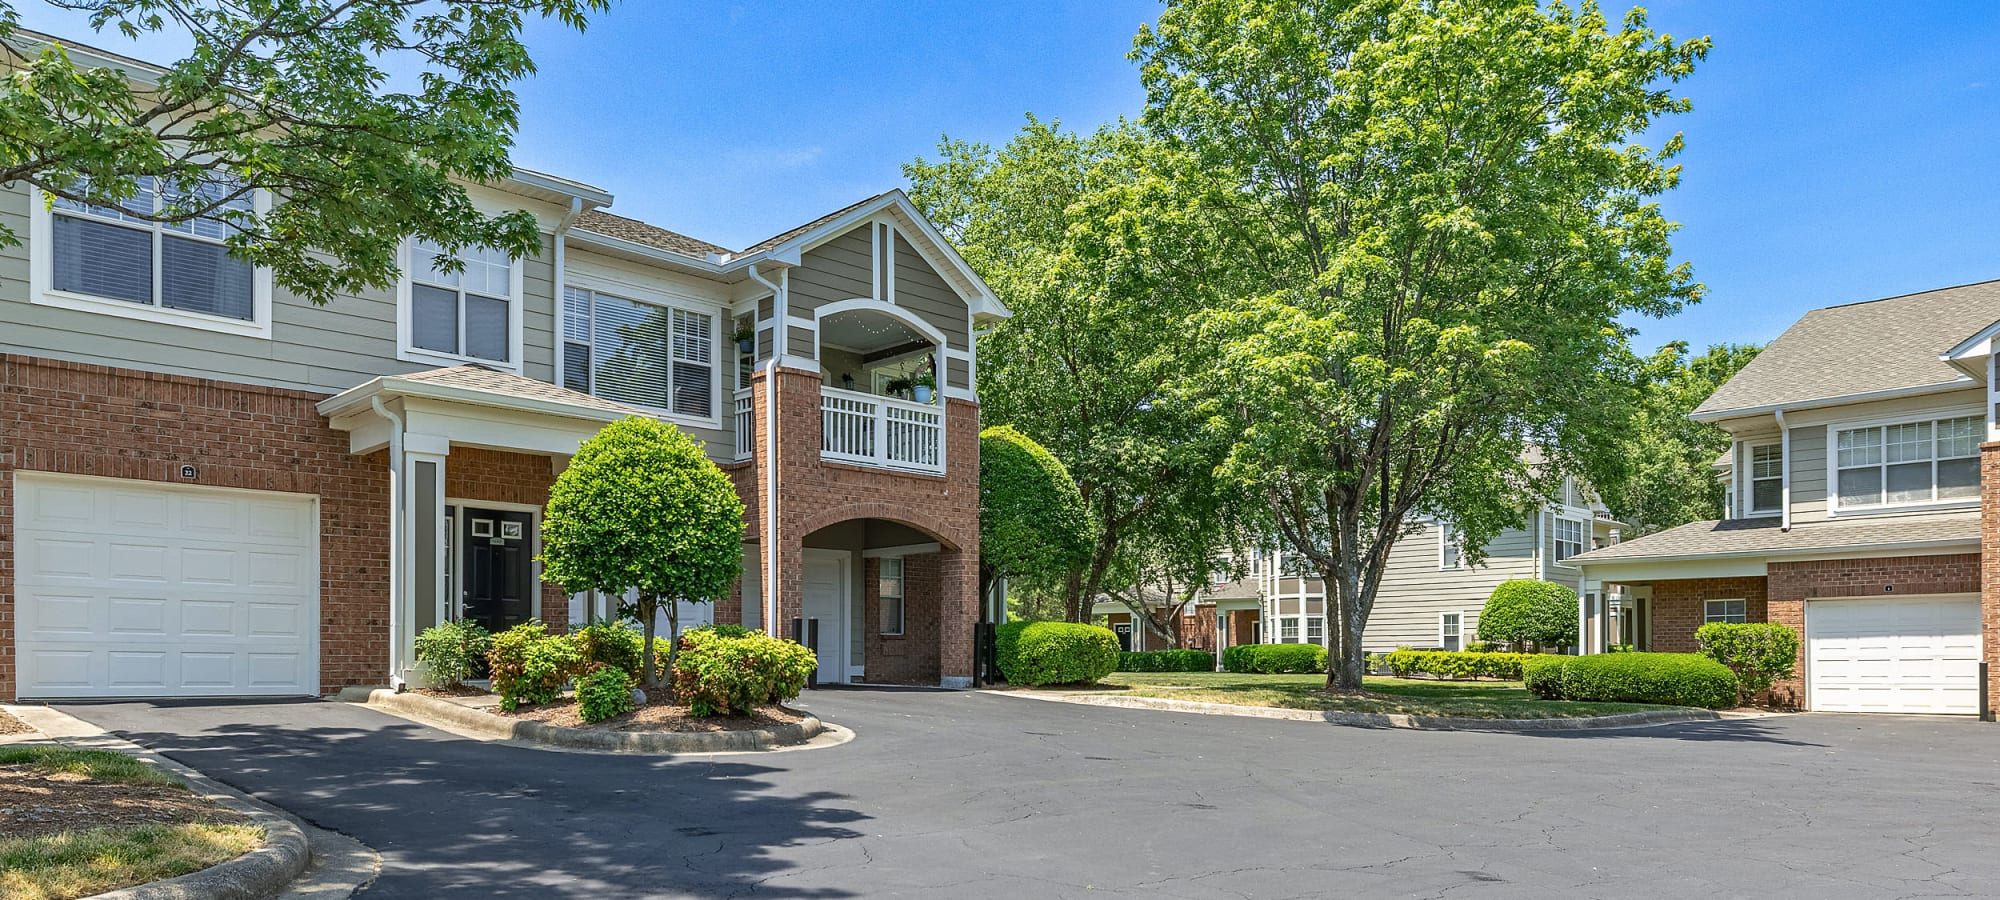 Apply to live at The Preserve at Ballantyne Commons in Charlotte, North Carolina